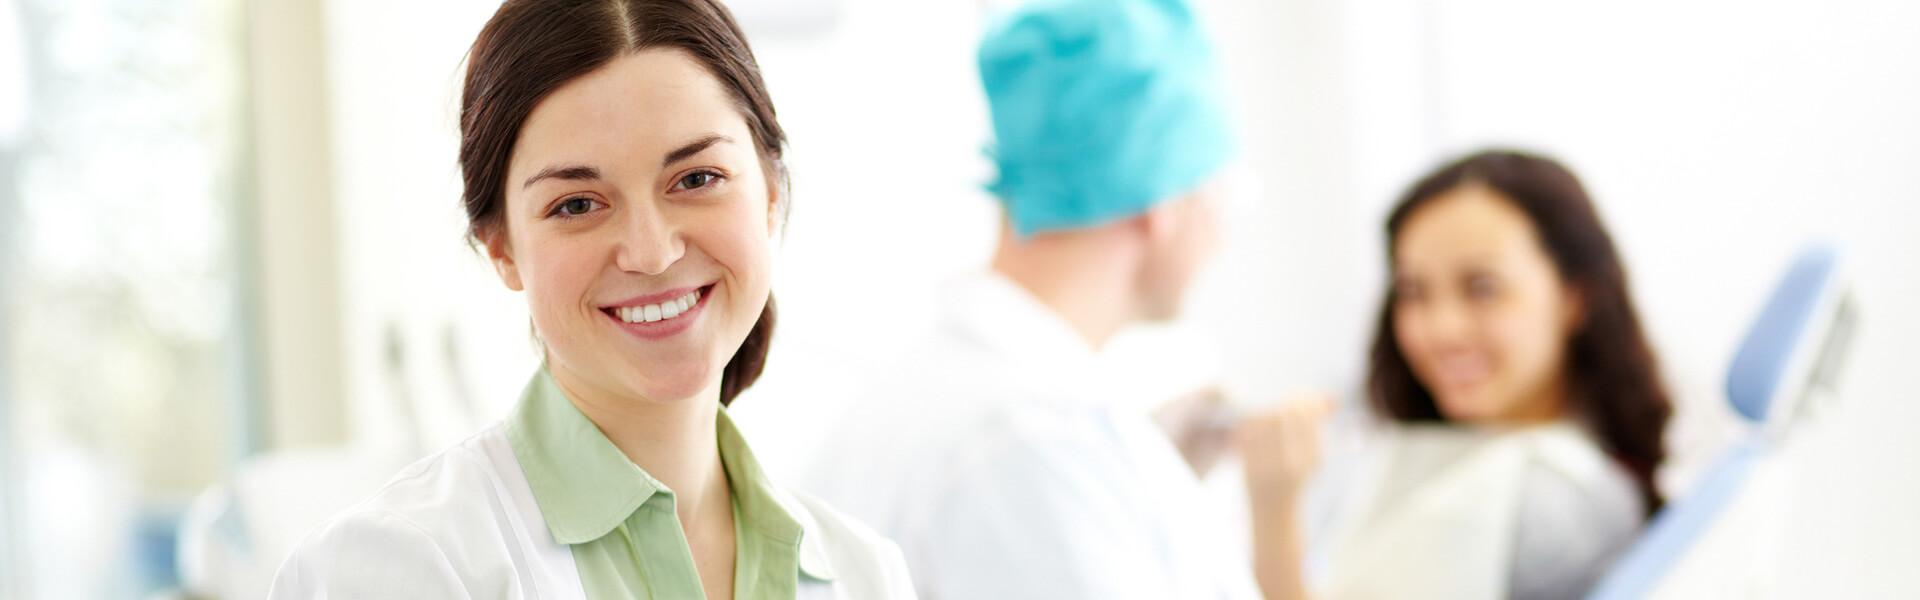 Dental assistant smiling at the camera in a blurred background